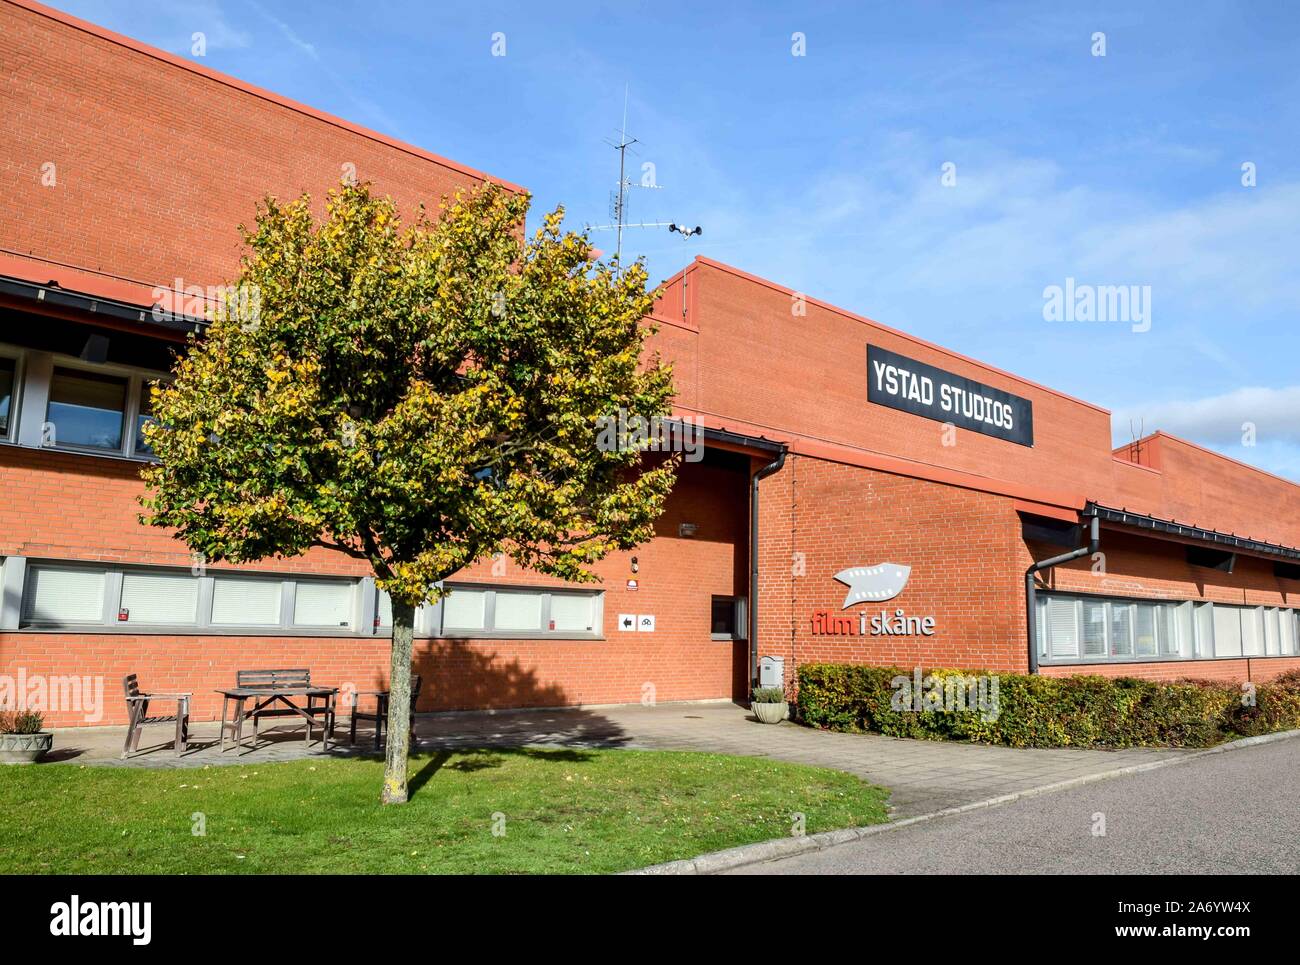 The main Film iSkane building of Ystad Studios in Yestad, Sweden. This was the headquarters for the 40+ episodes of the Swedish crime series, Wallande Stock Photo